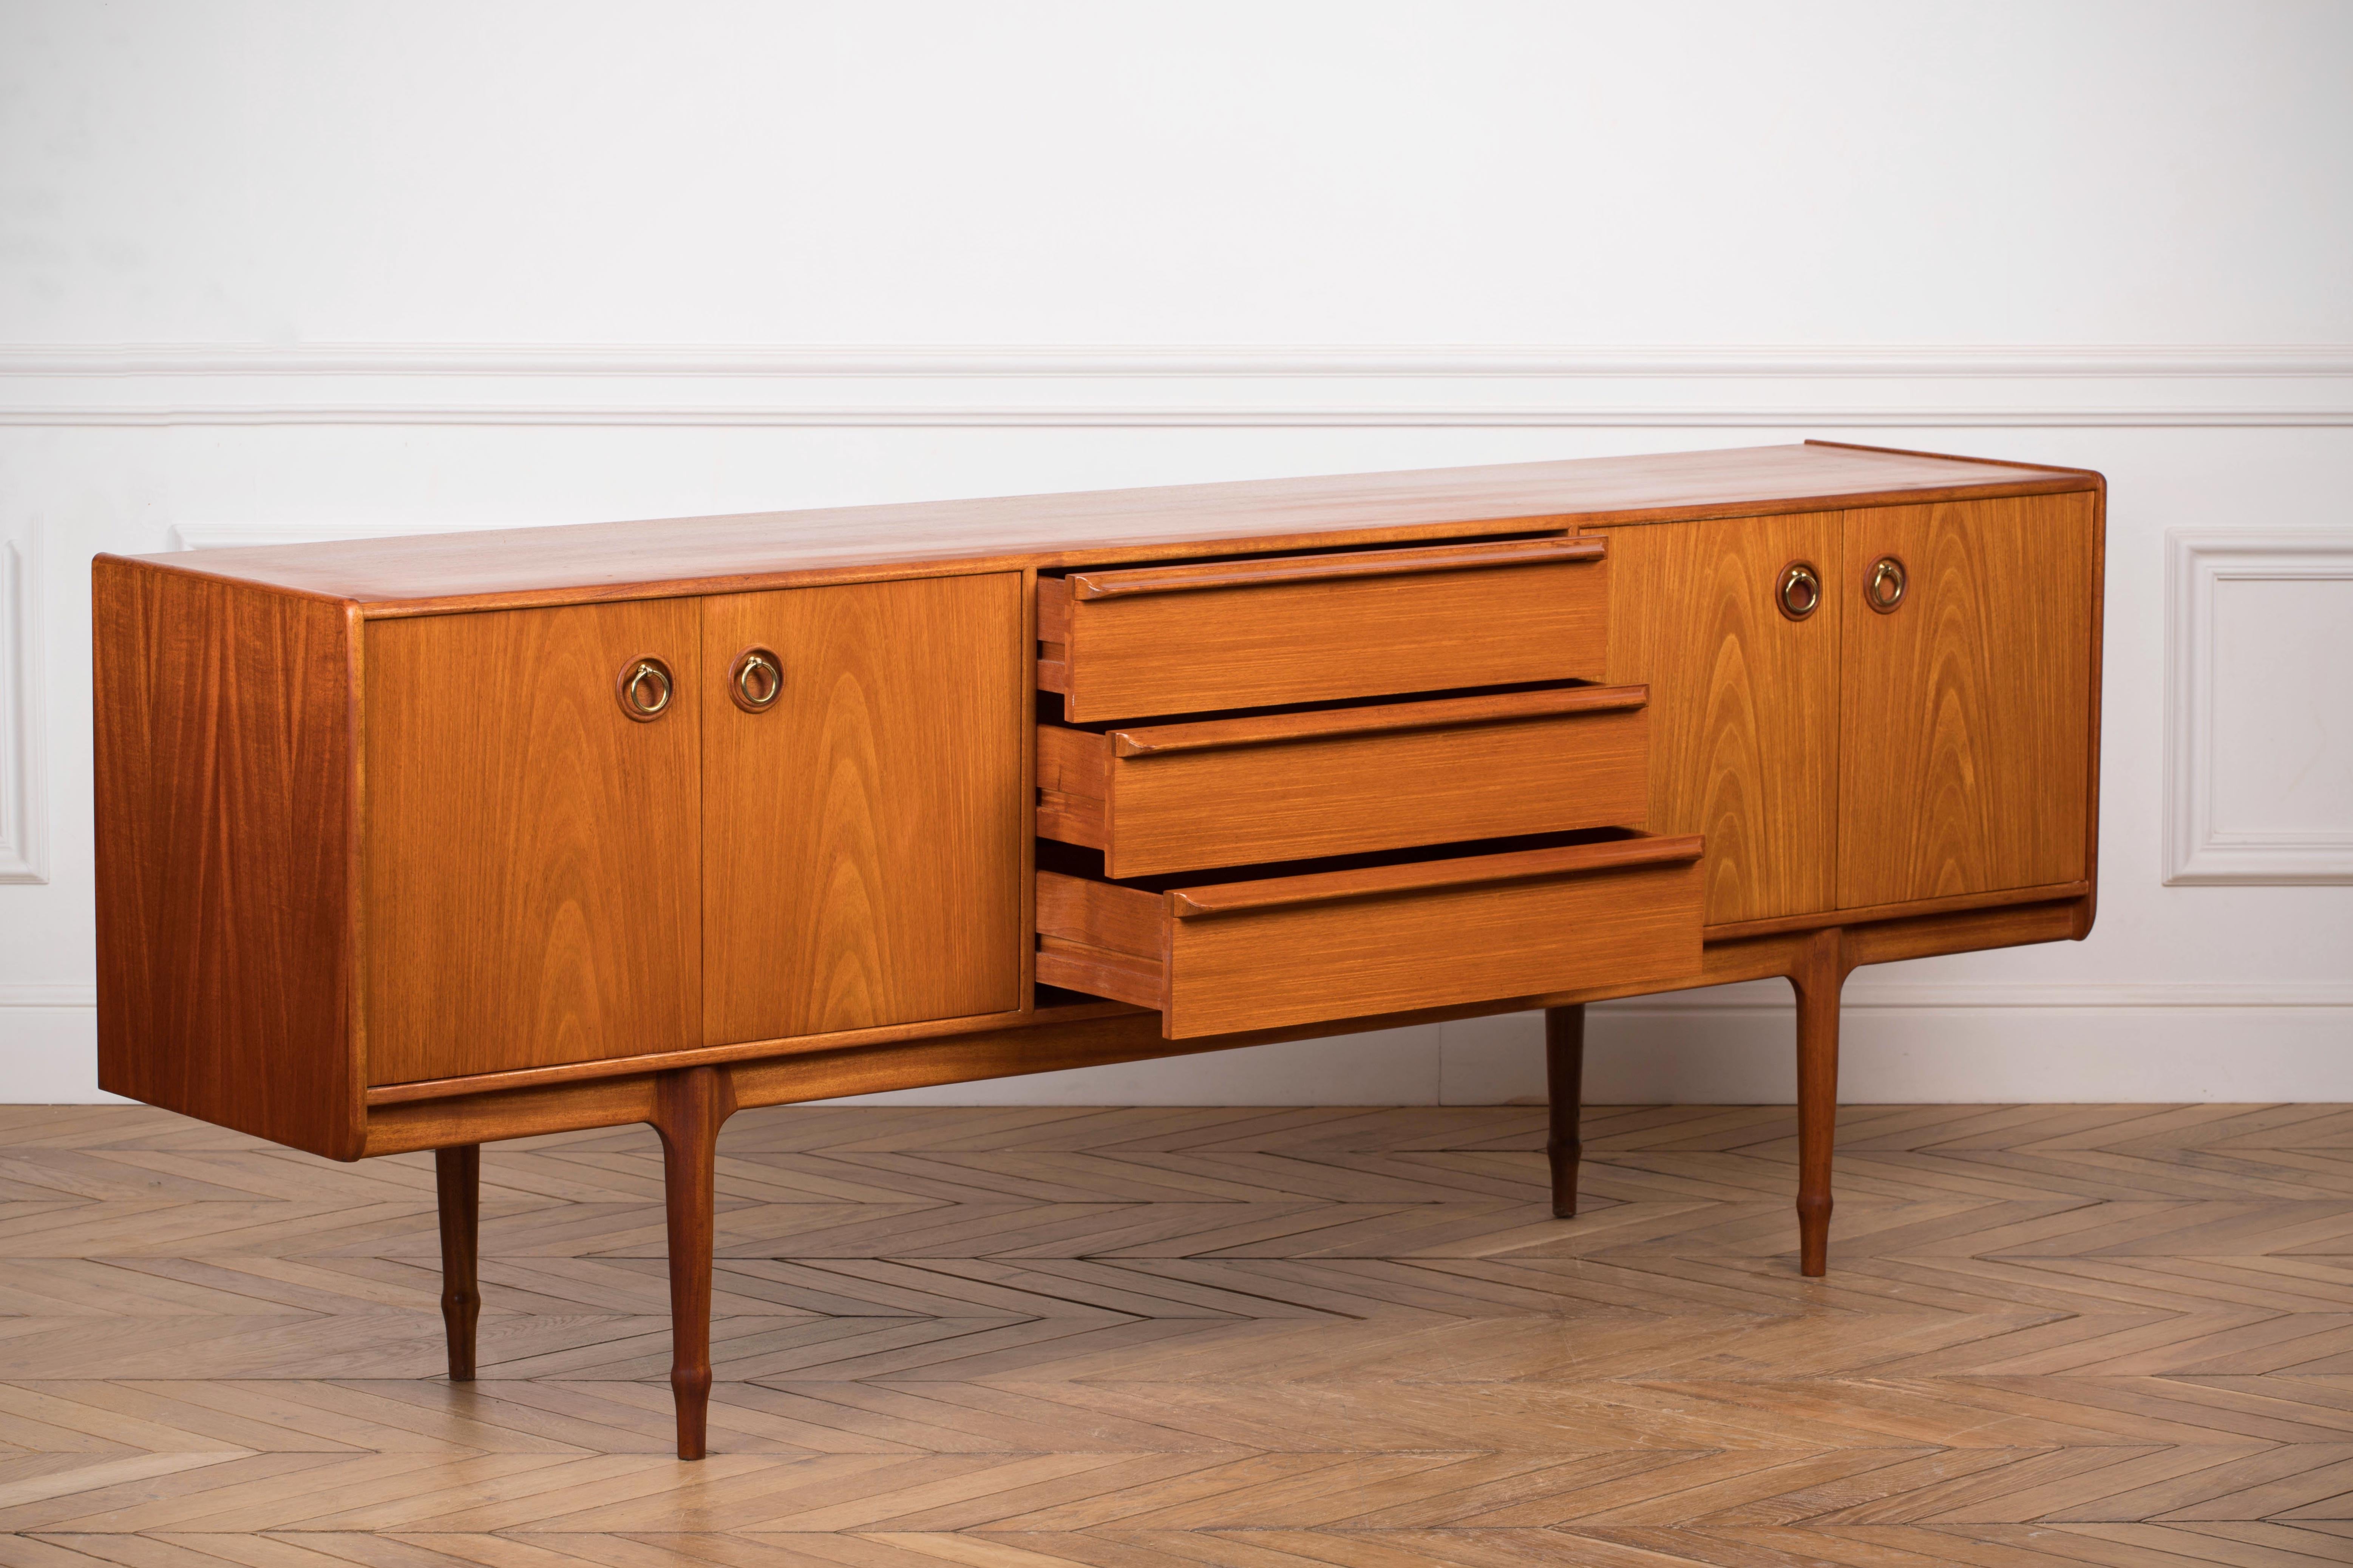 This beautiful vintage modern sideboard features plenty of room for storage within its three drawers and two large storage compartments hidden by cabinet doors. Sleek two-tone design with unique carved pulls and tapered legs adding to the allure.